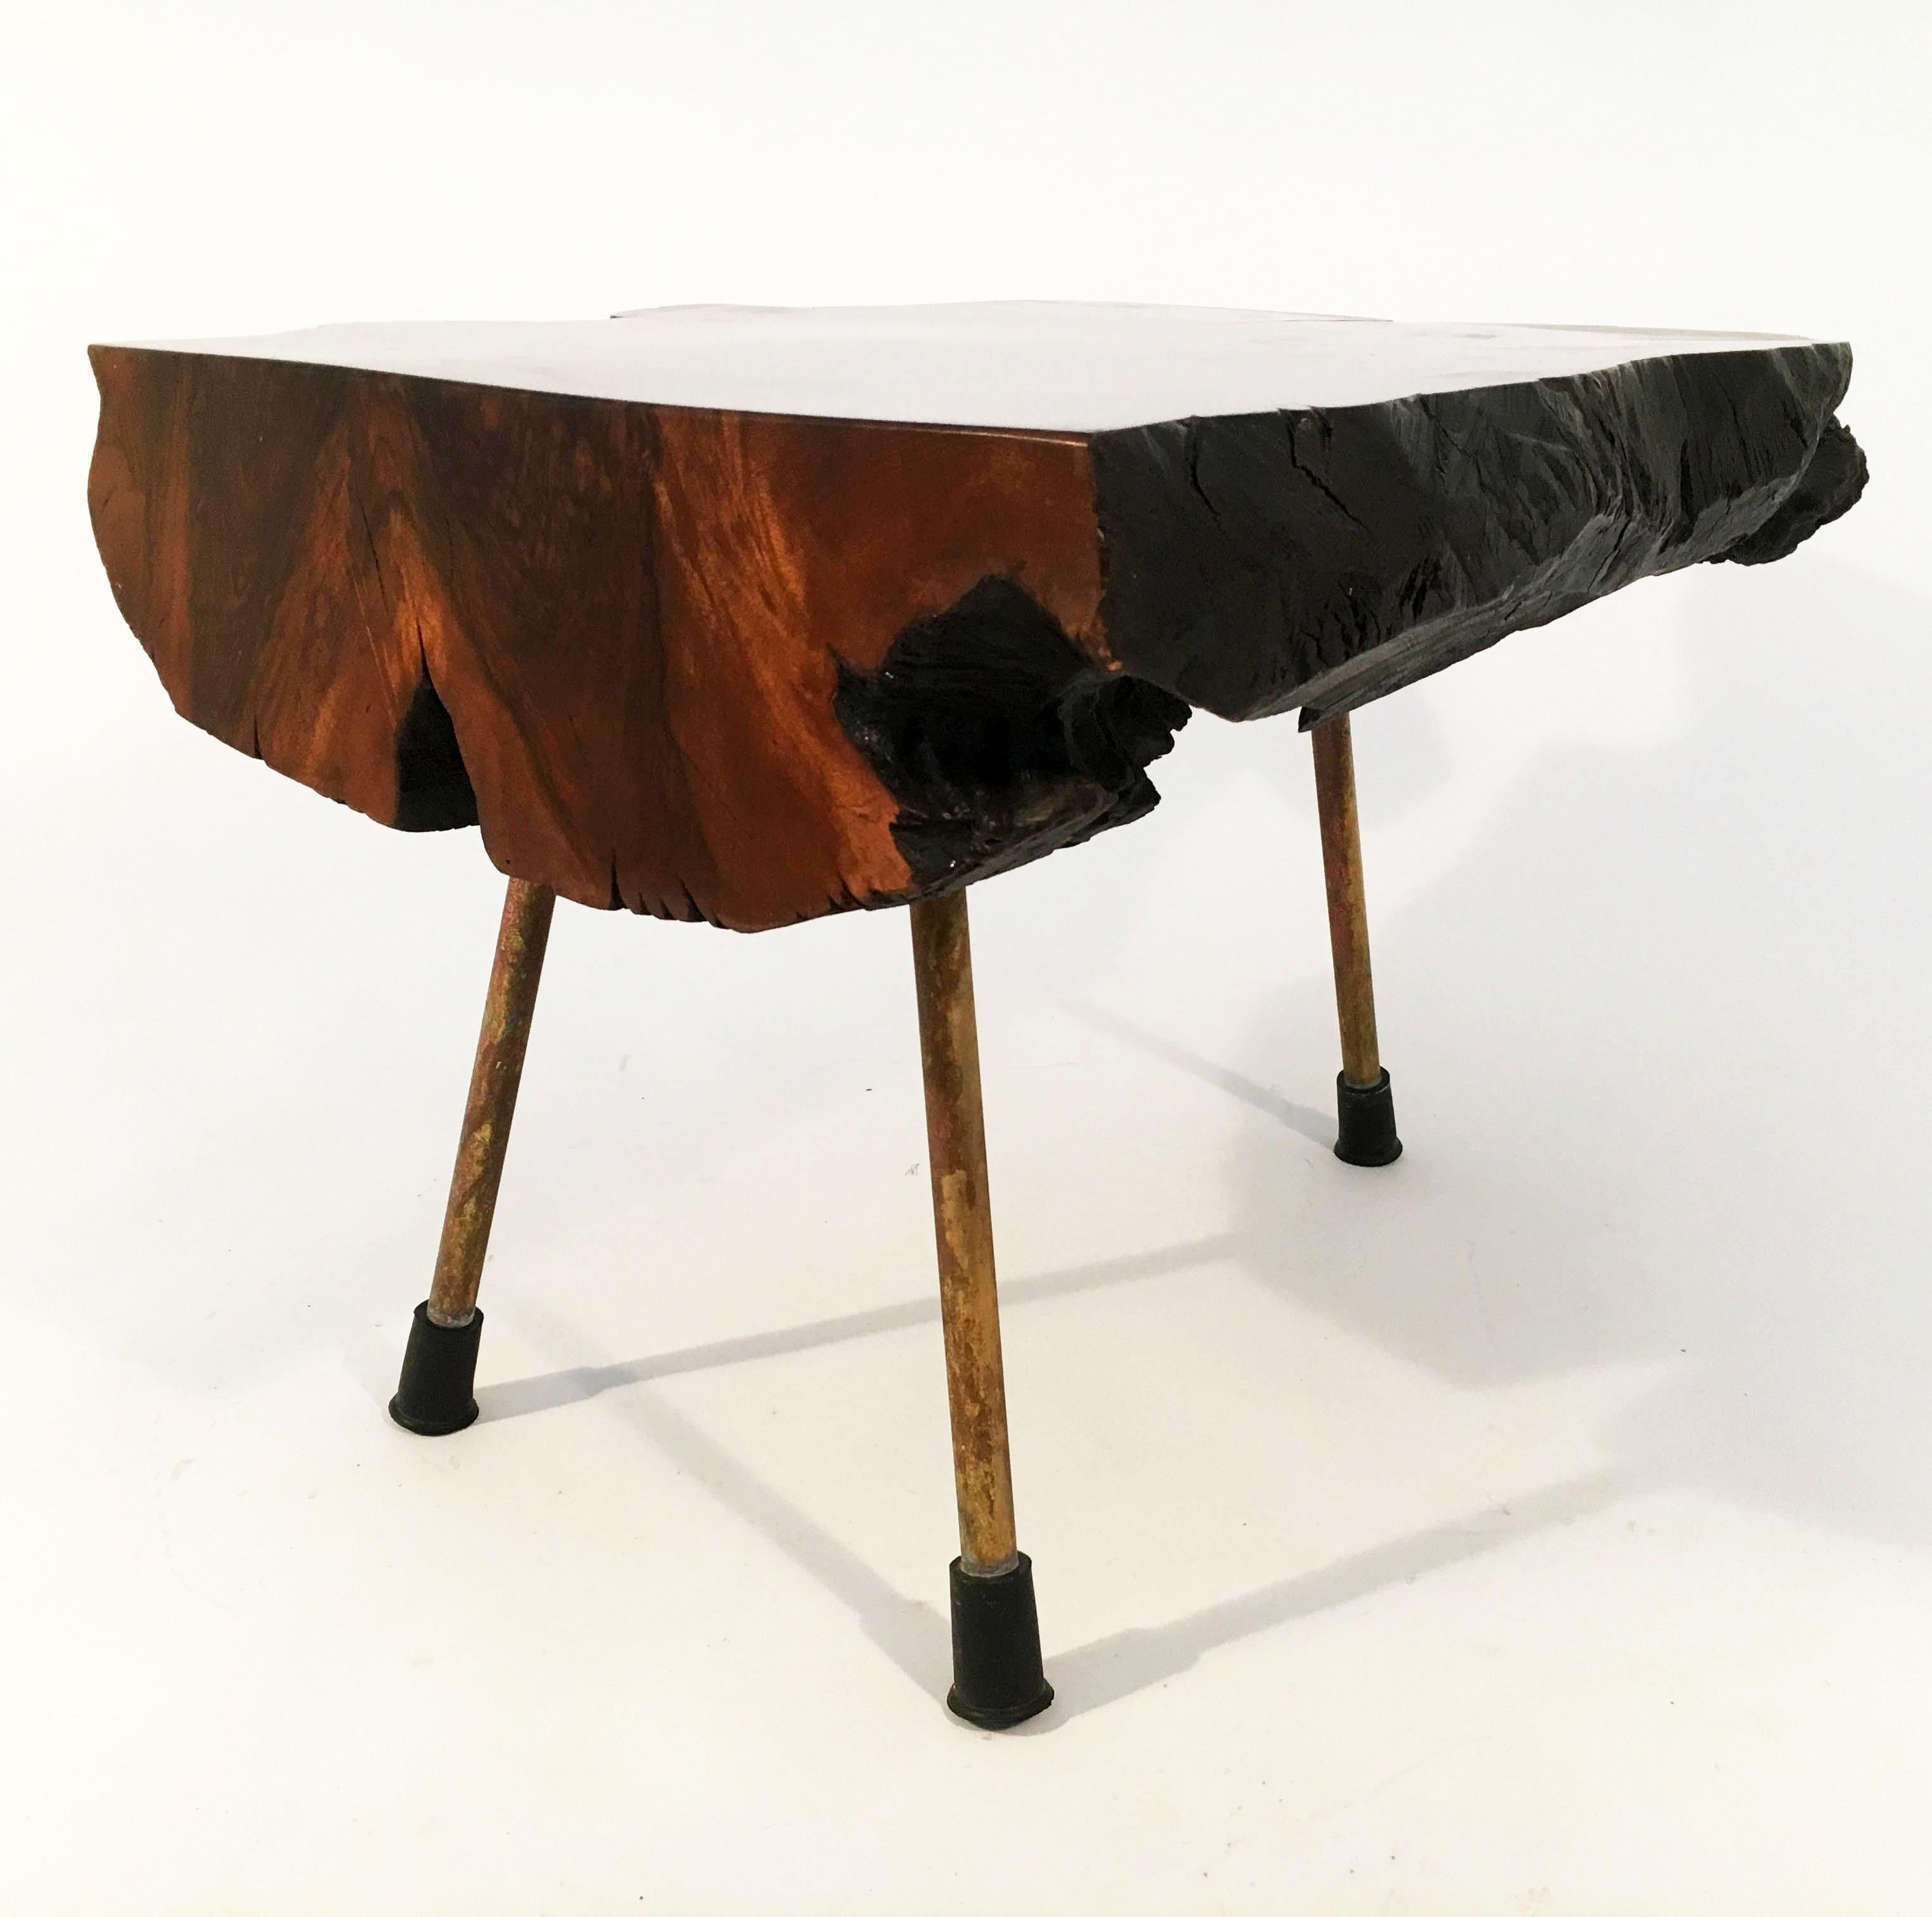 Carl Auböck II Original Large Walnut Tree Trunk Table 'Model No. 3' Austria, 1950s. Signed on the brass feet: Auböck. Each leg is numbered and the corresponding number is embossed into the slab of walnut tree trunk. A truly spectacular and massive